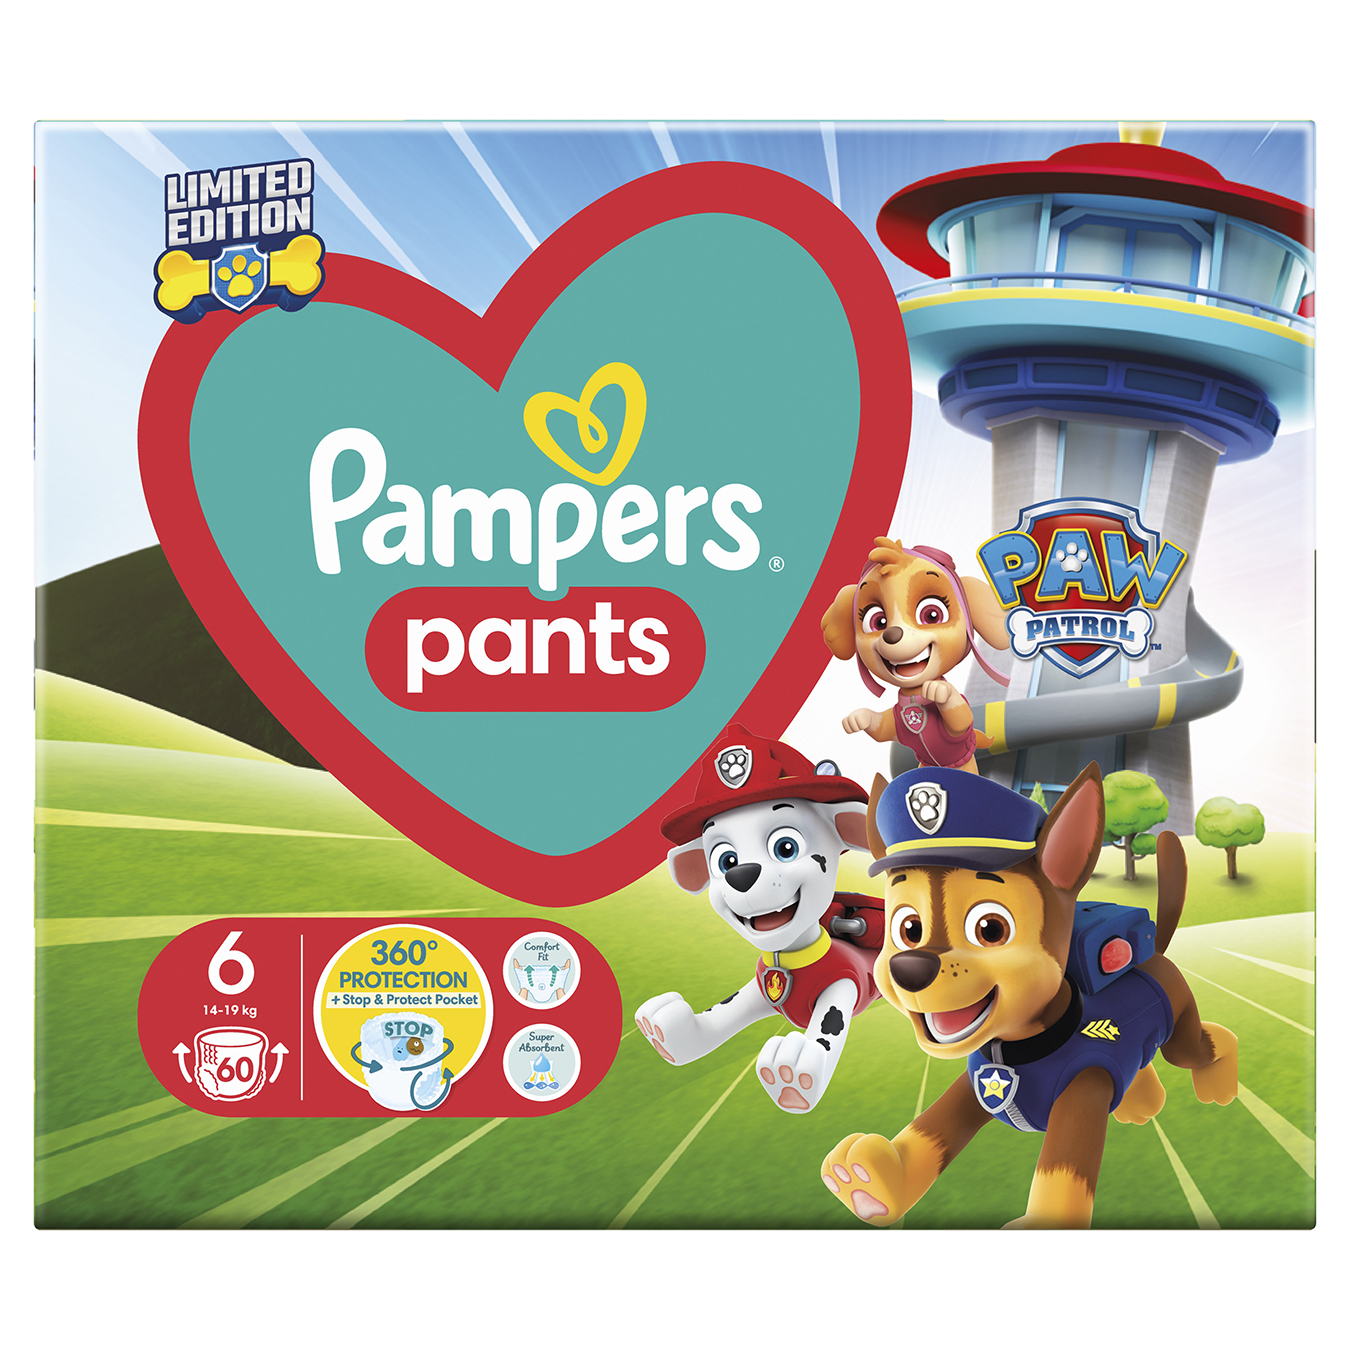 Diapers-panties Pampers paw patrol limedit children's disposable pants  extra large 14-19kg 60pcs ᐈ Buy at a good price from Novus